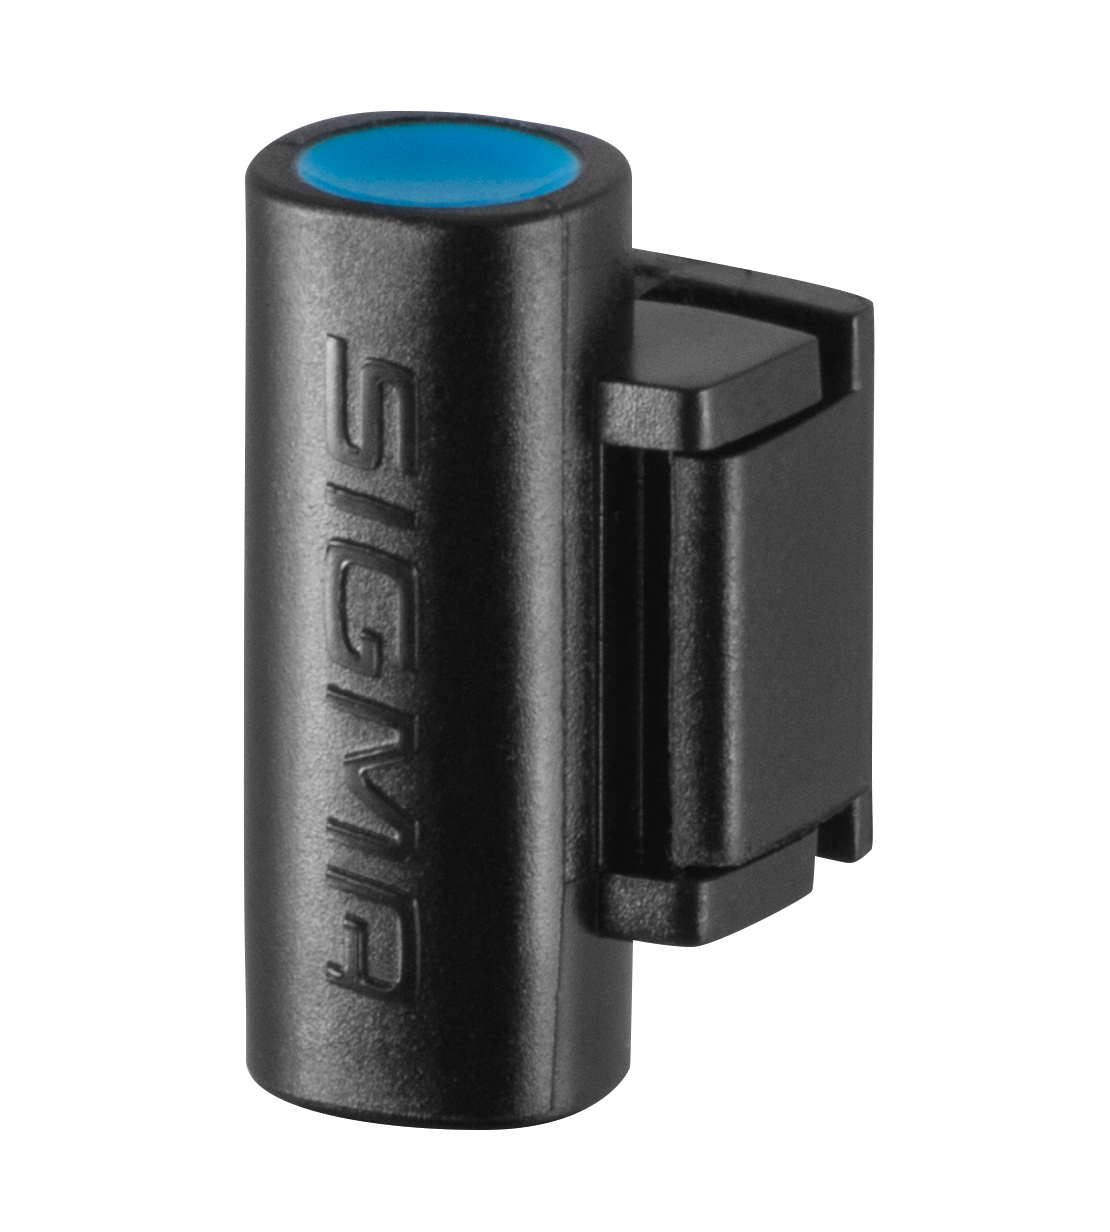 SIGMA Magnet For Wireless Bike Computers